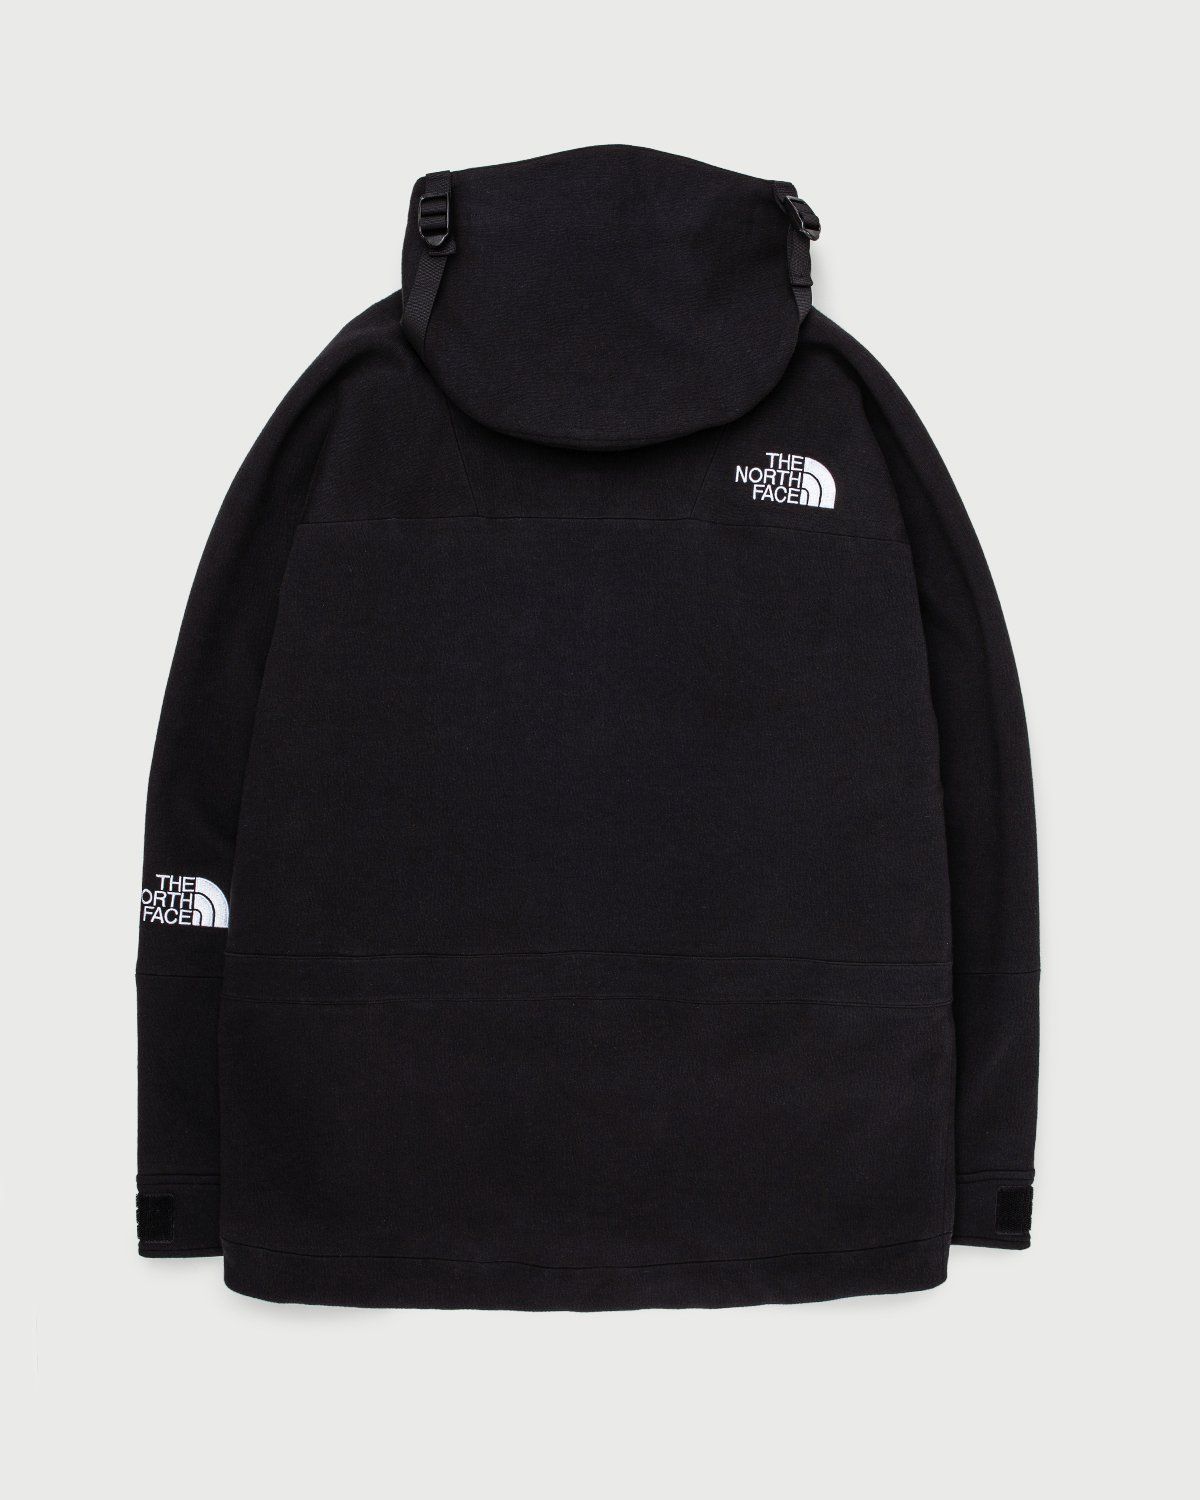 The North Face – Black Series Spacer Knit Mountain Light Jacket Black - Outerwear - Black - Image 3